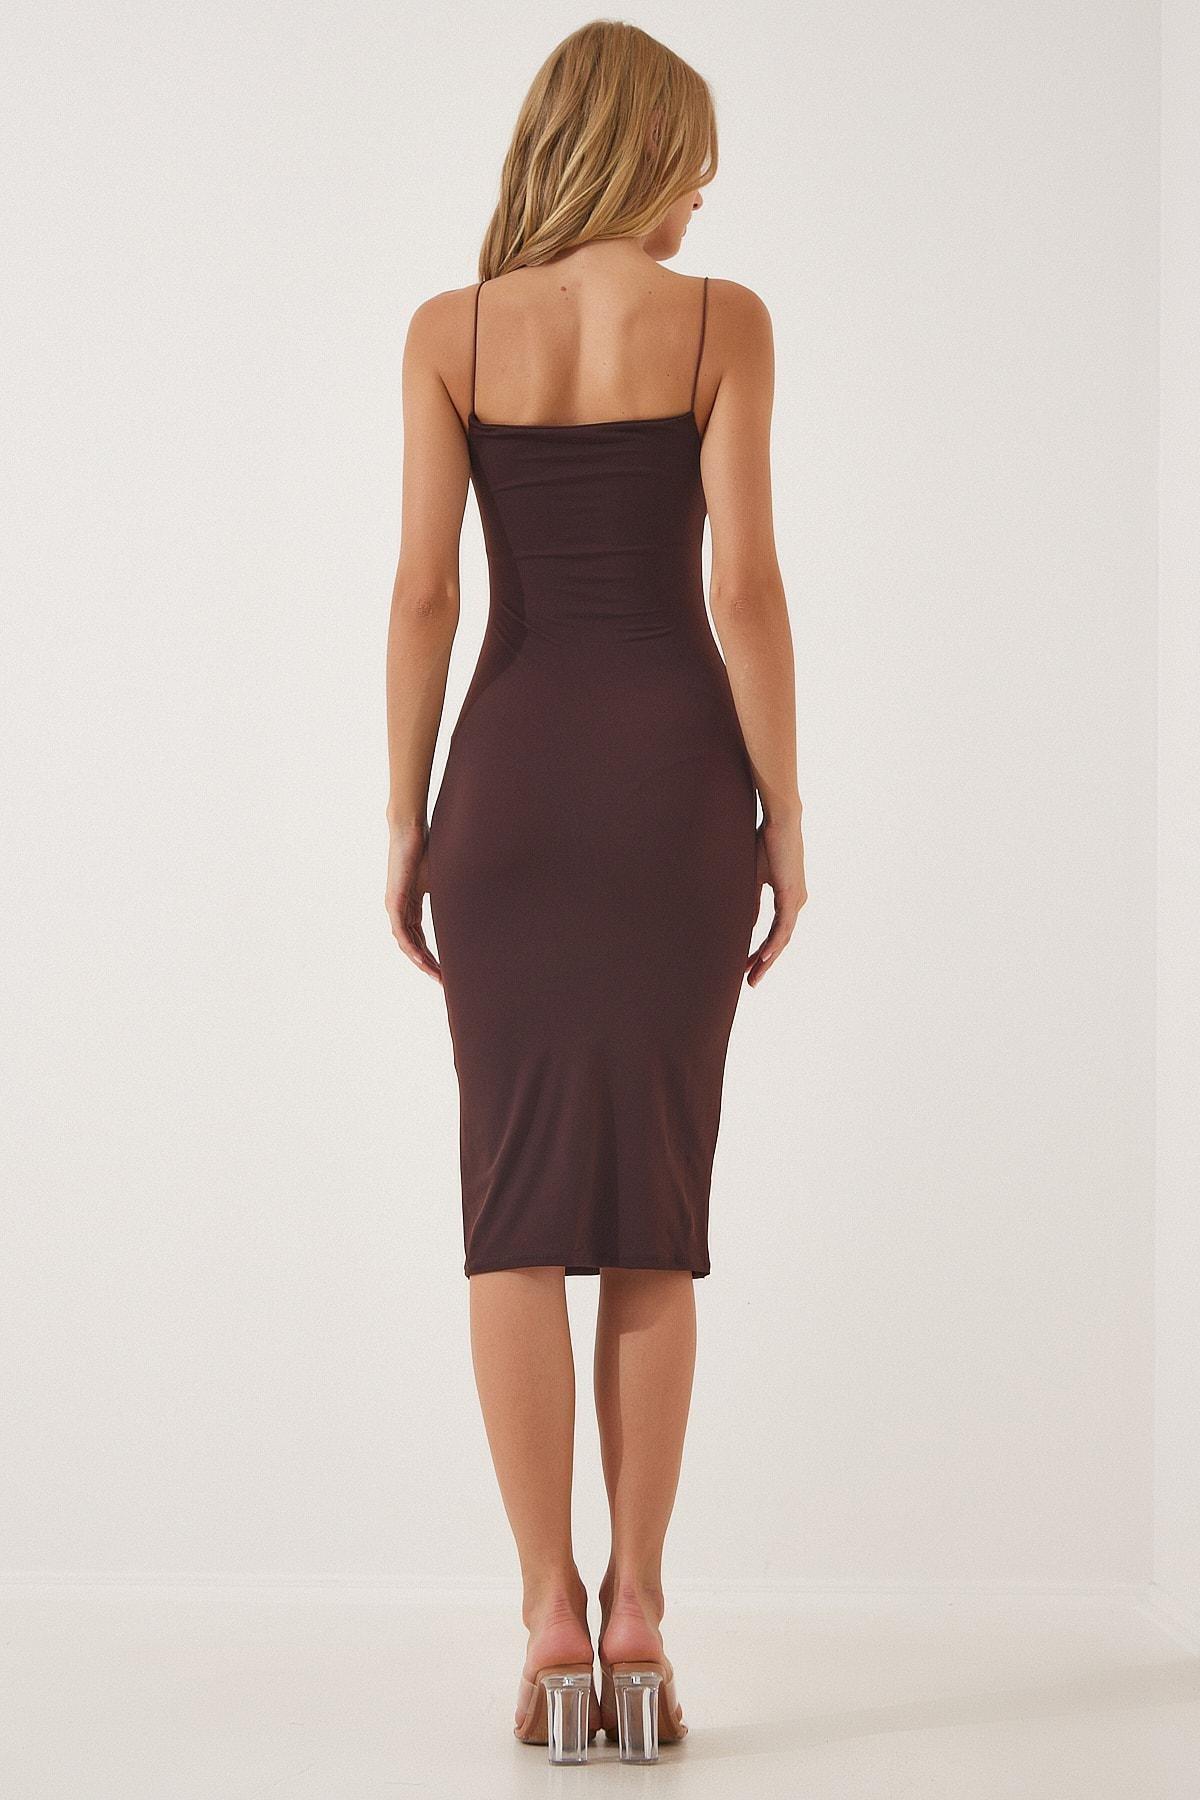 Happiness Istanbul - Brown Bodycon Dress